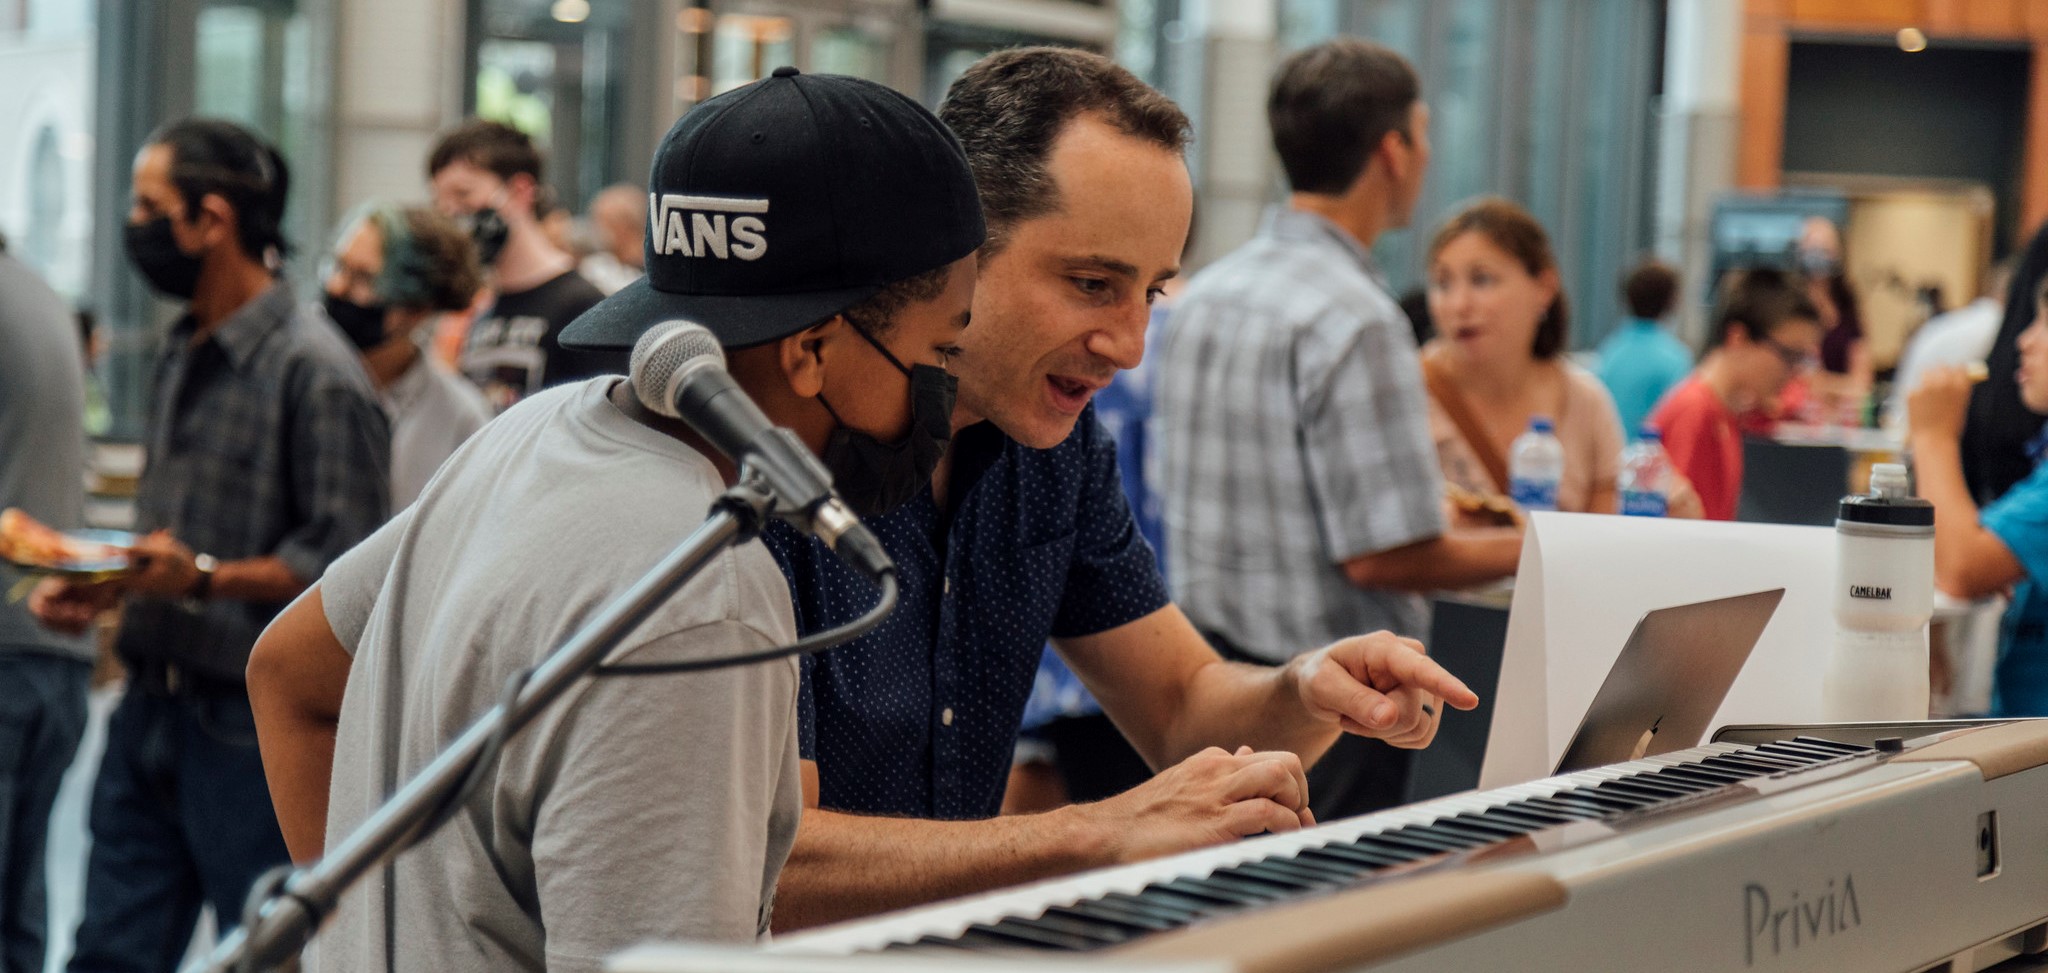 Professor and student looking at an electronic keyboard. Professor is pointing to the keys of the keyboard while the student watches his movements.